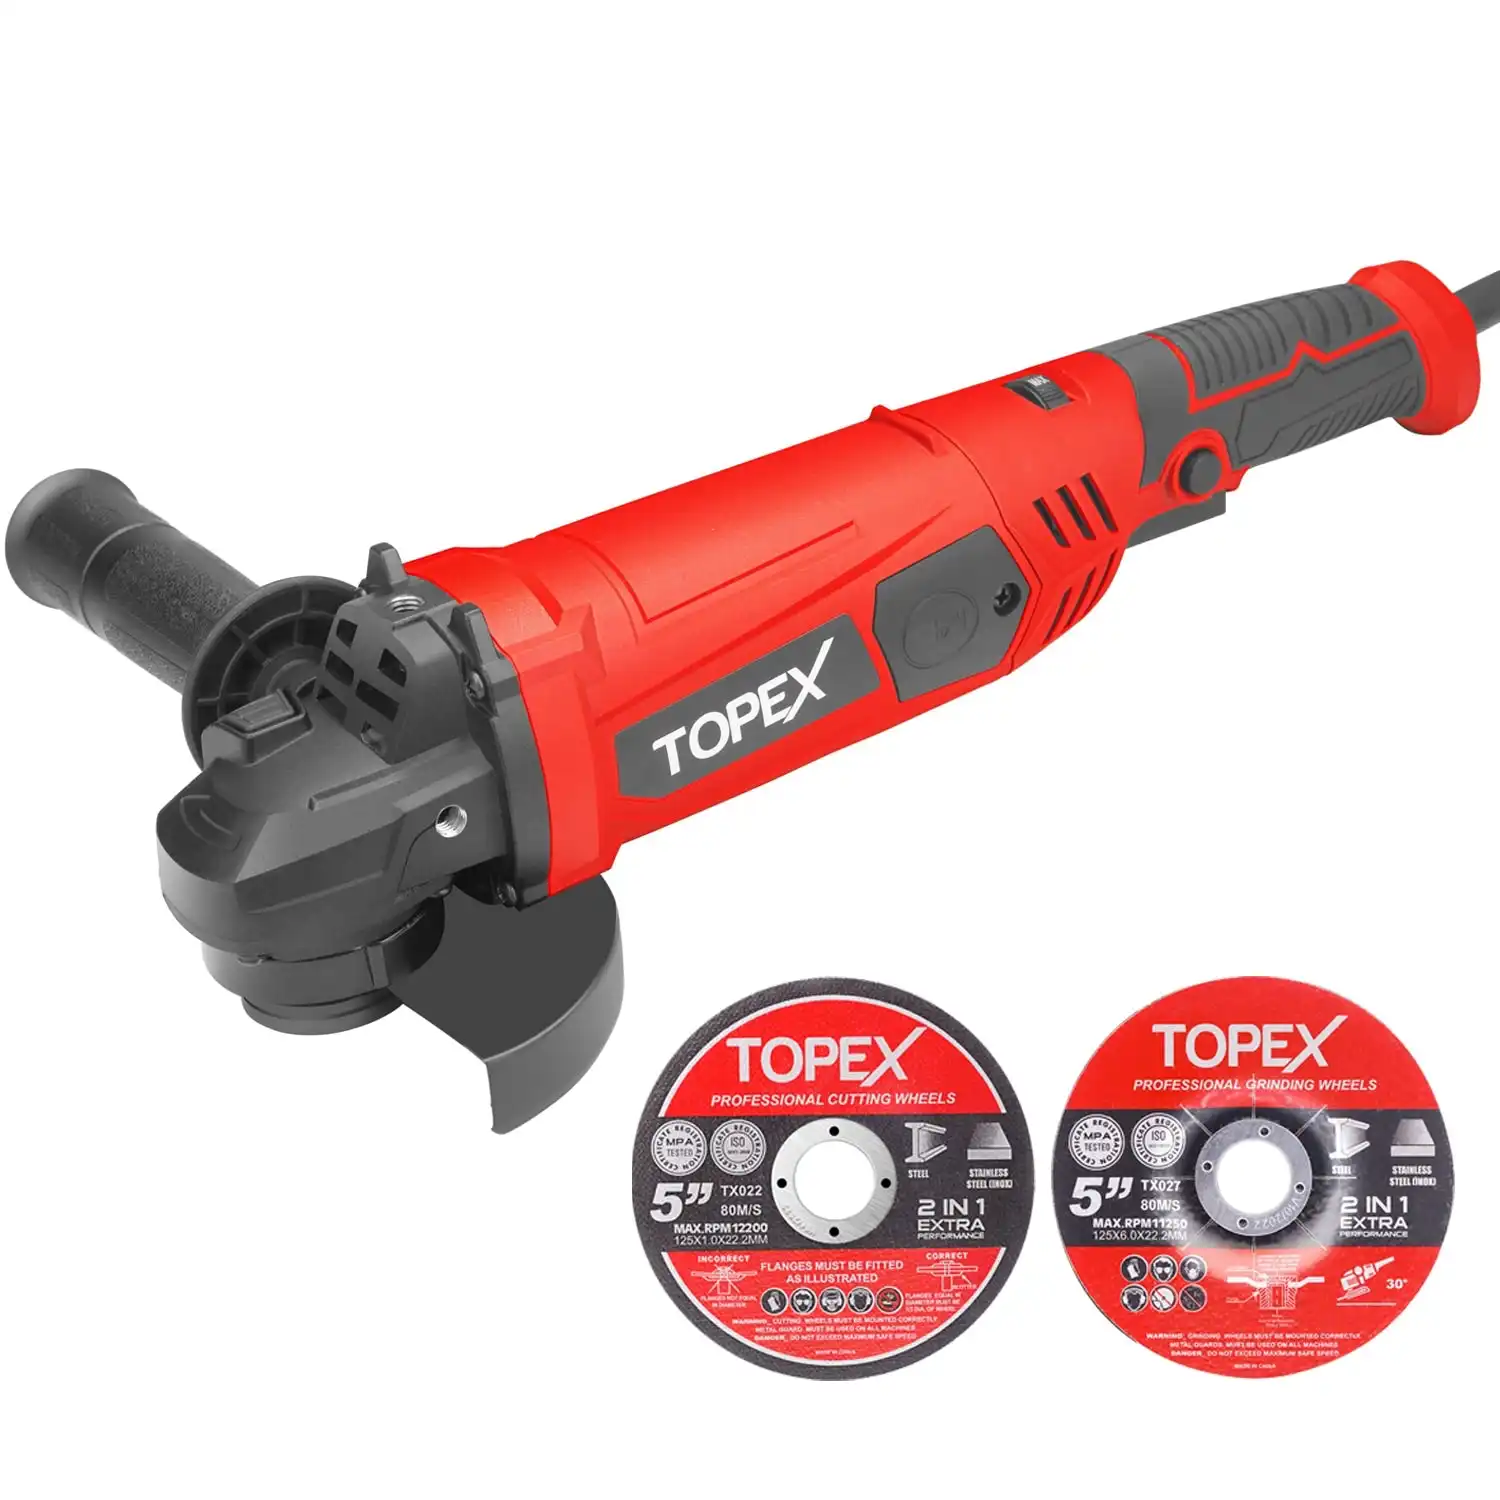 Topex 1200W Angle Grinder Heavy Duty 125mm 5" Angle Grinder w/ Cutting Disc